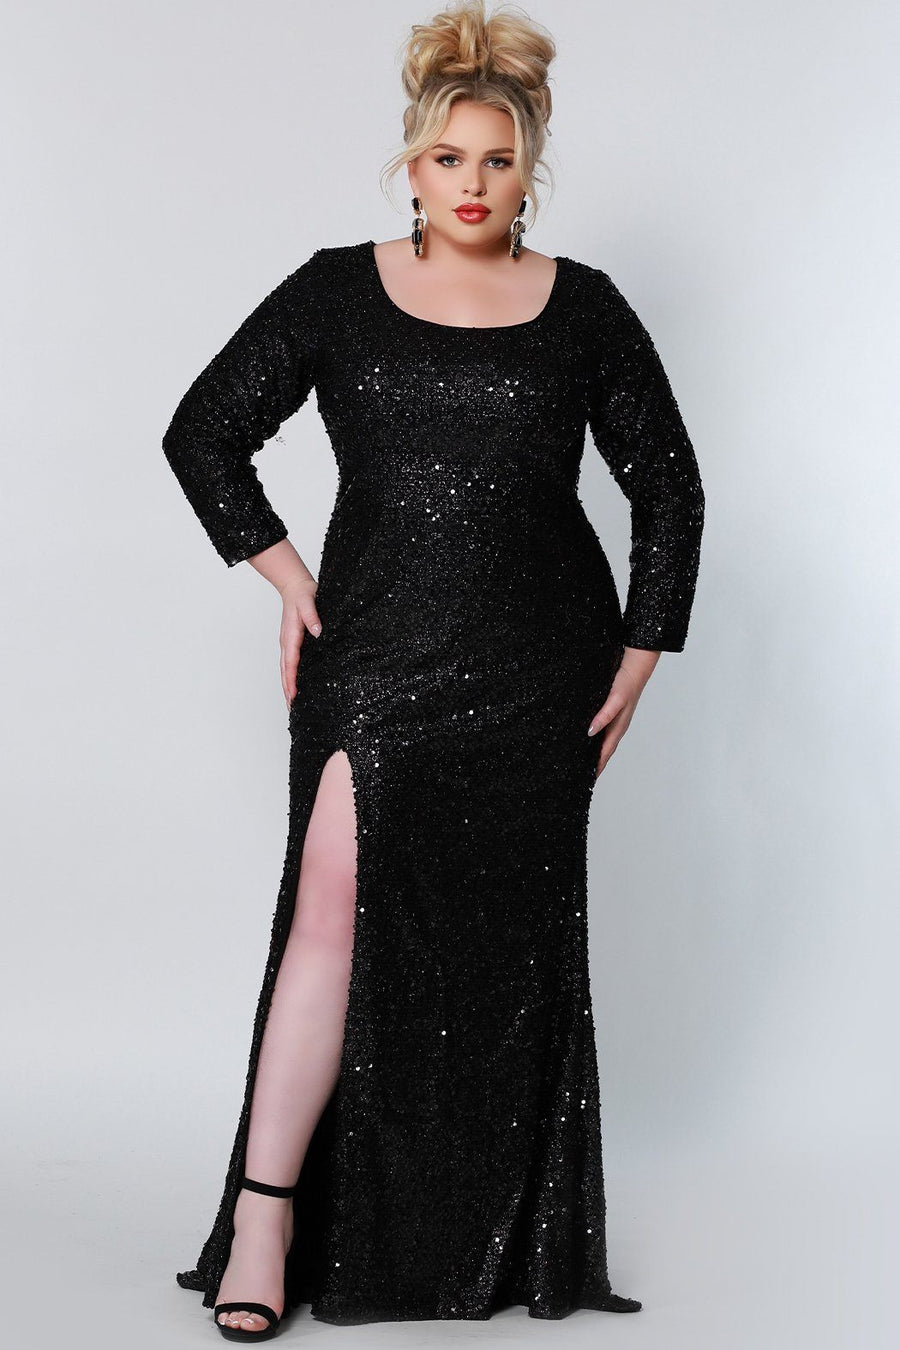 Plus Size Formal Sequin Evening Dress with Sleeves | SC7320 – Sydney's ...